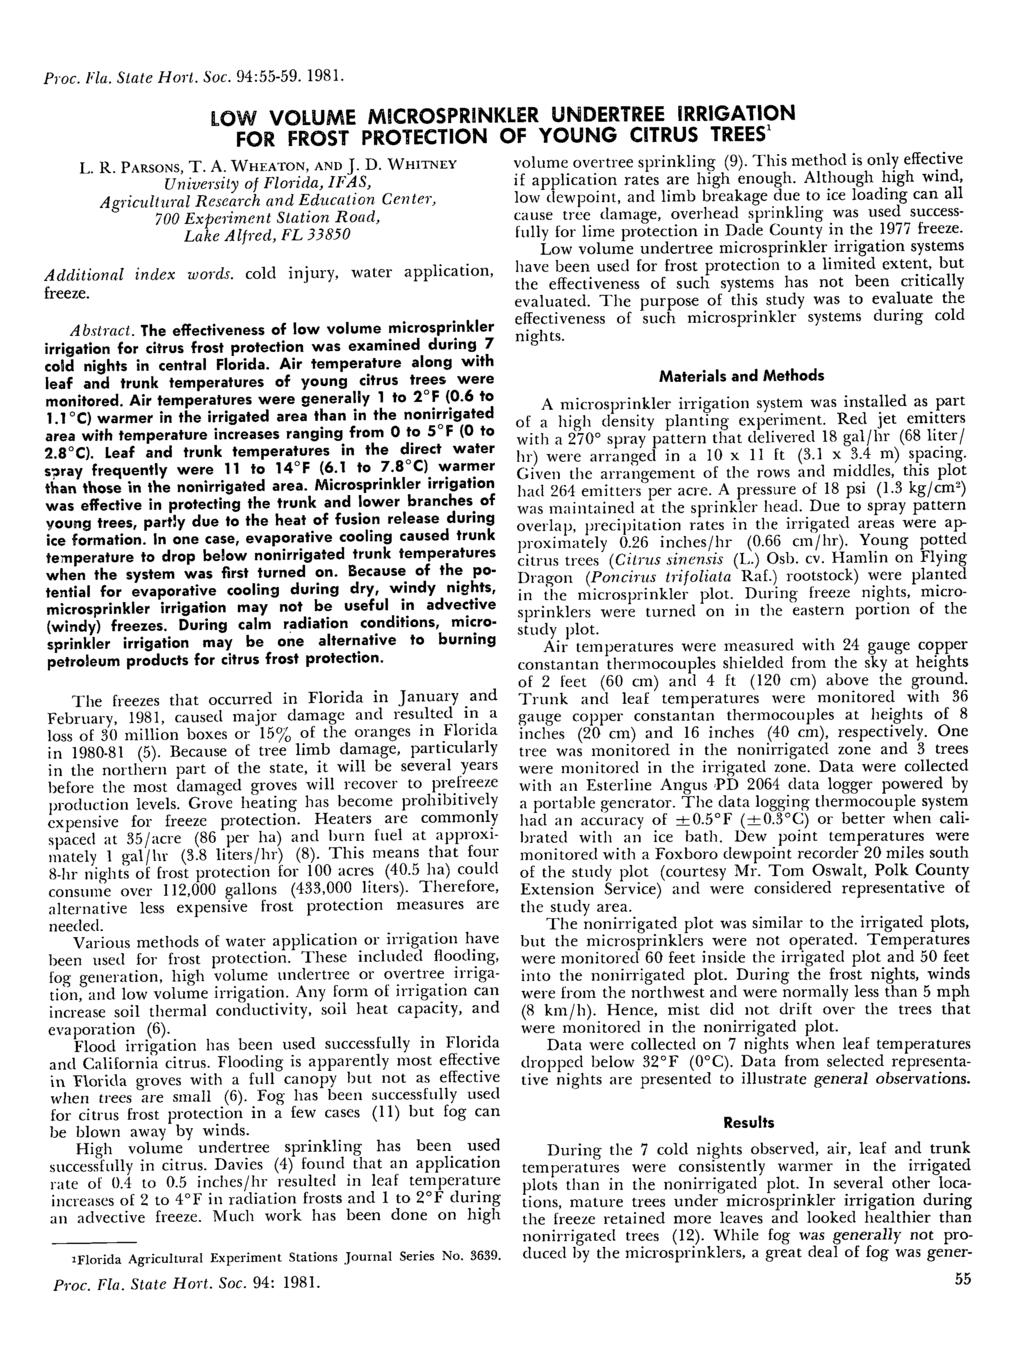 Proc. Ha. State Hort. Soc. 94:55-59. 1981. LOW VOLUME M8CROSPR1NKLER UNDERTREE IRRIGATION FOR FROST PROTECTION OF YOUNG CITRUS TREES1 L. R. Parsons, T. A. Wheaton, and J. D.